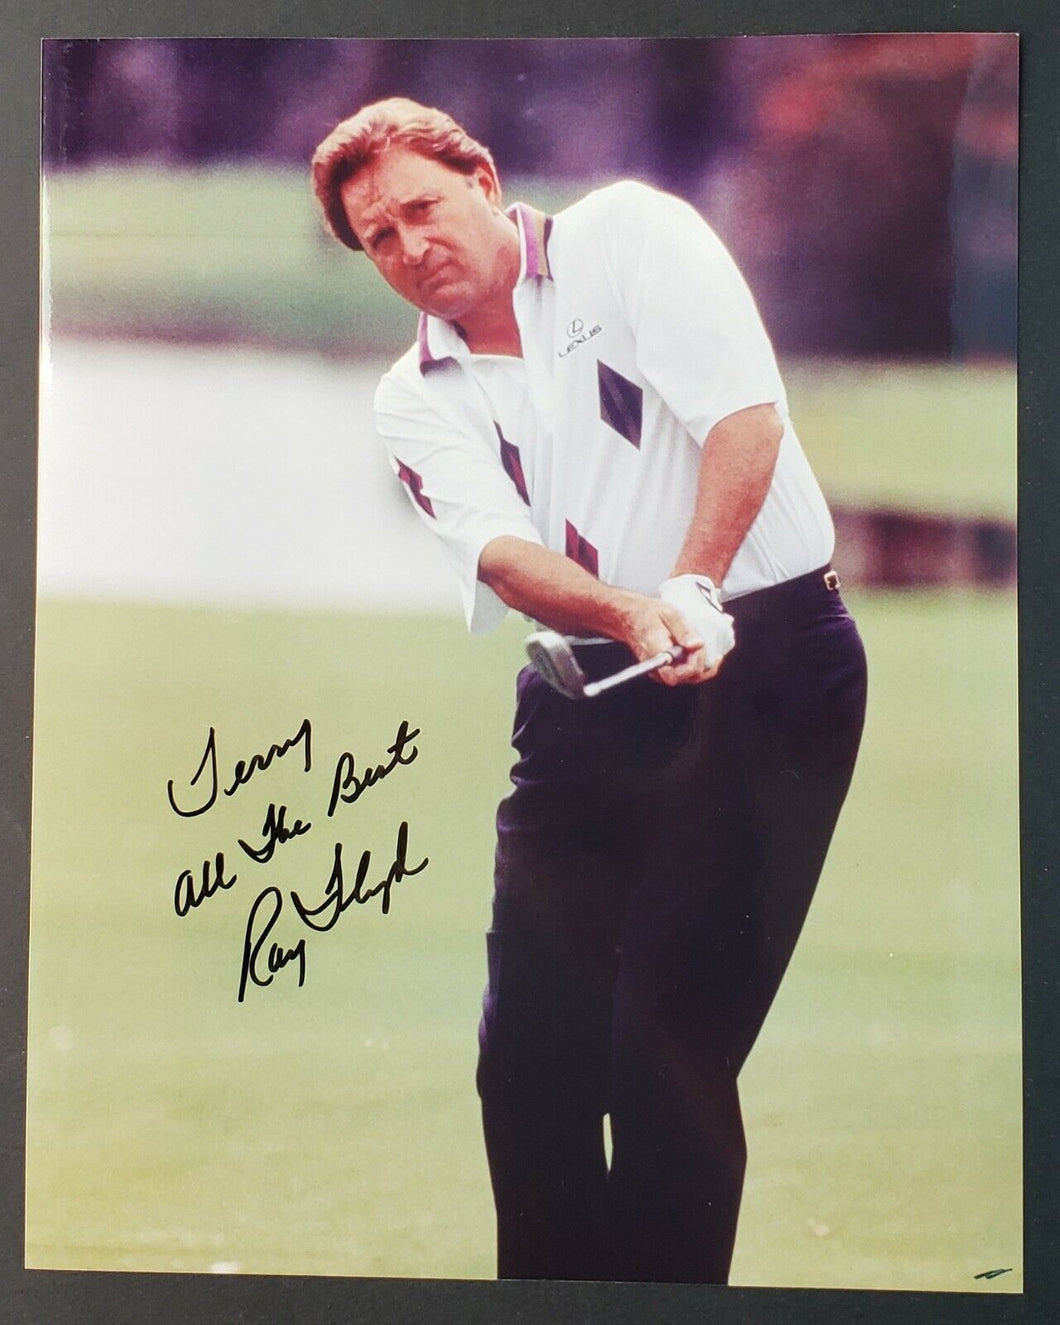 American Golf Hall Of Famer Ray Floyd Autographed Golfing Photo Picture 8x10